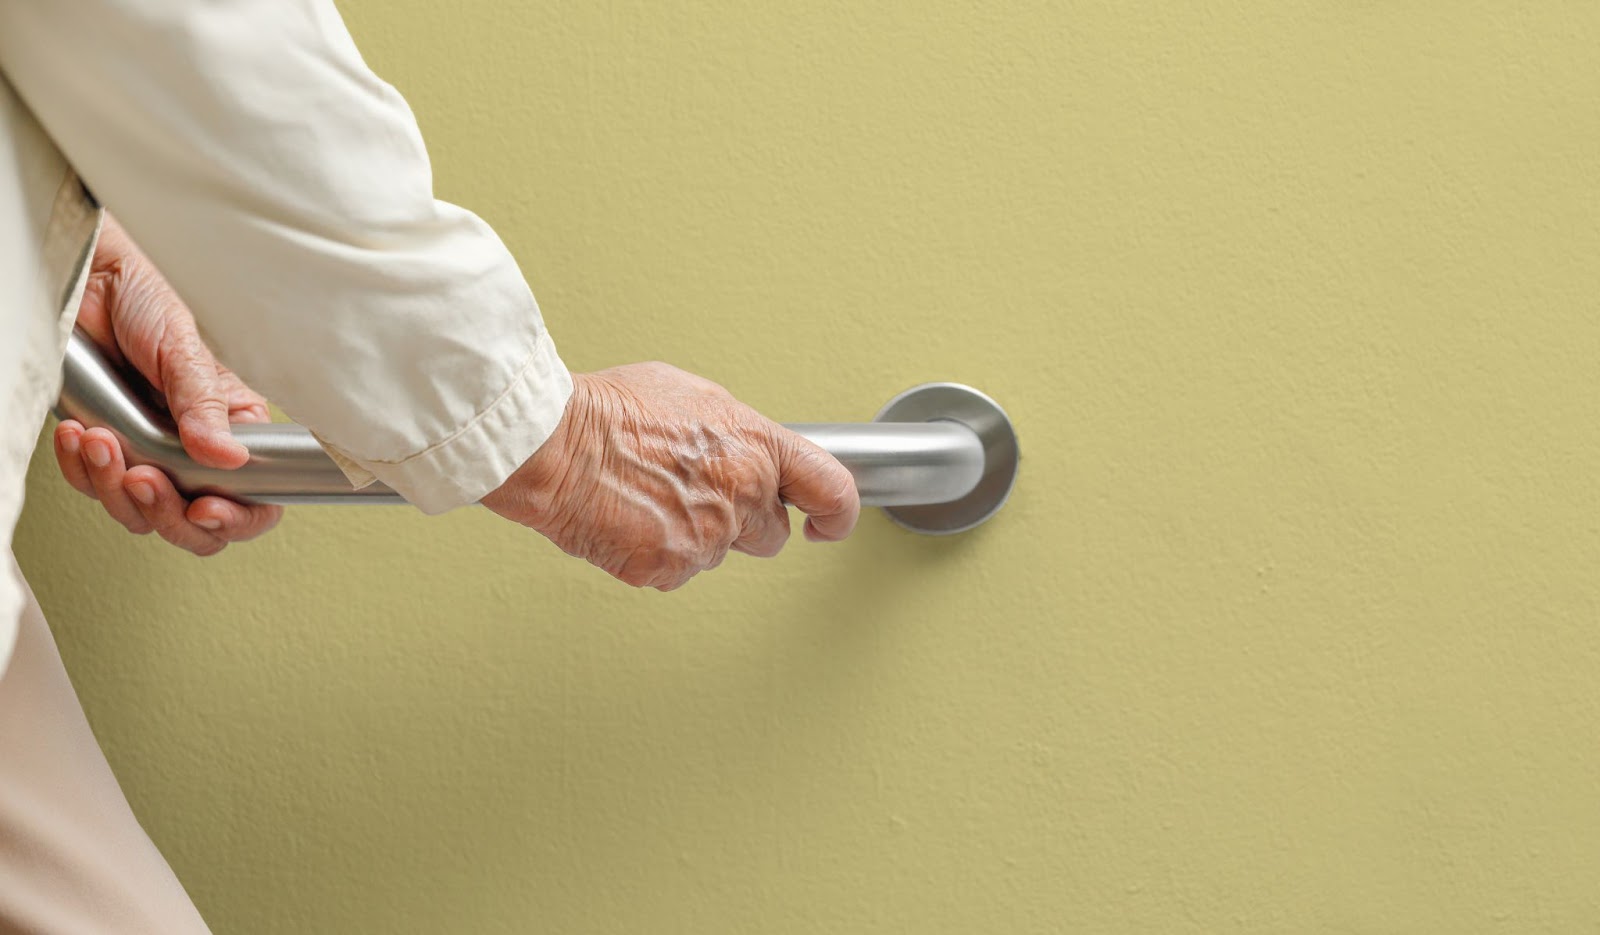 n older woman's hands use a grab bar for balance support